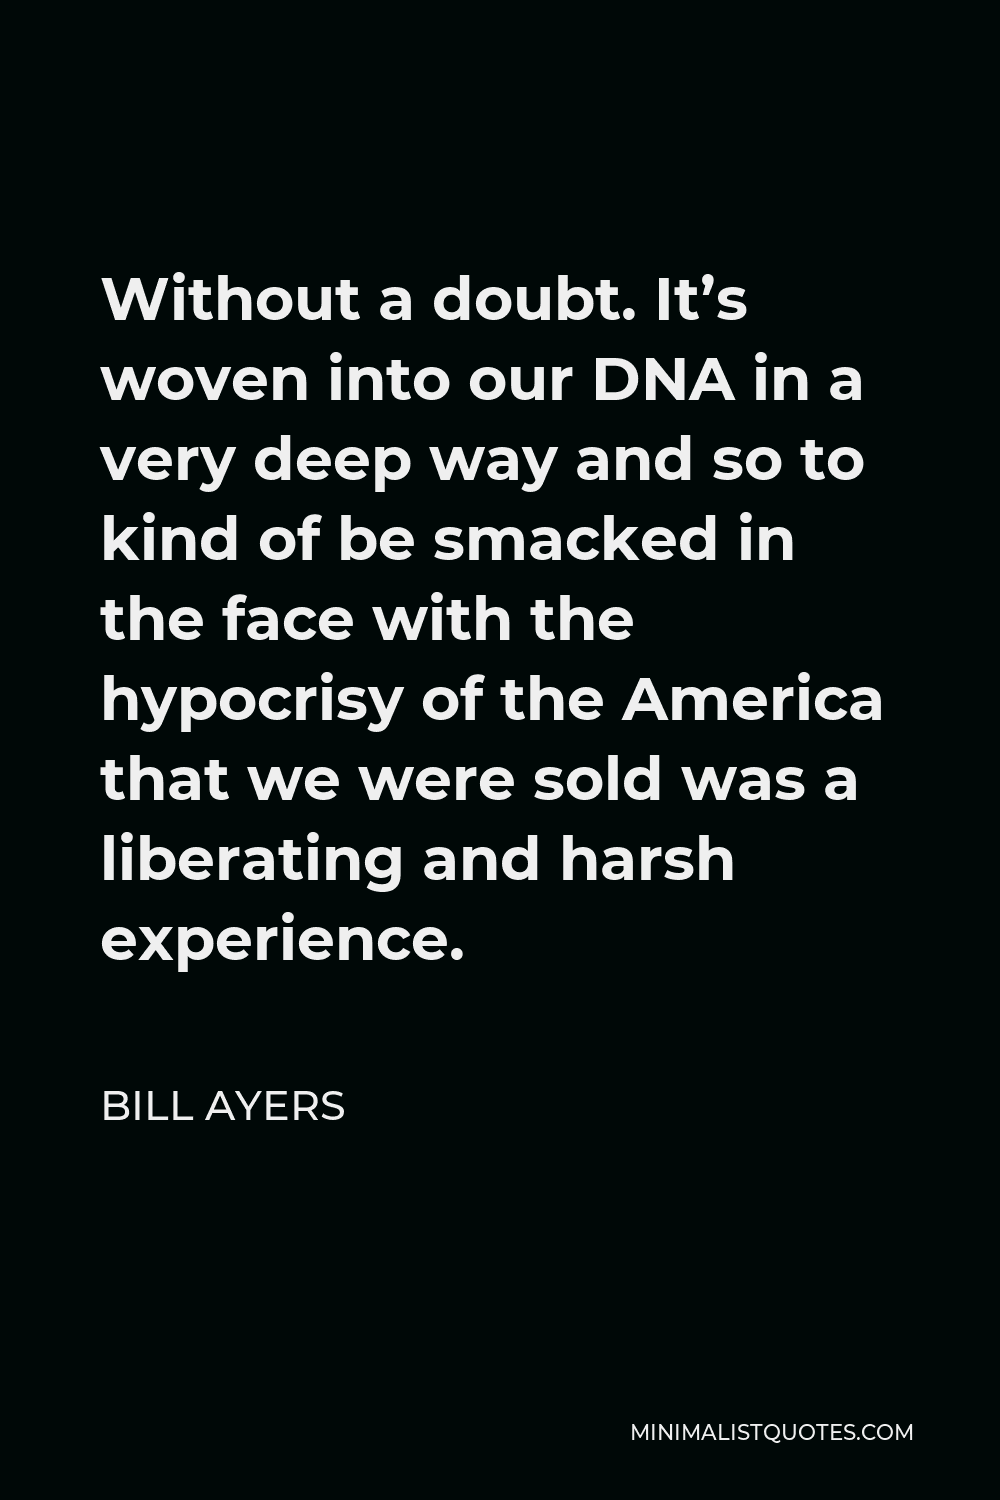 Bill Ayers Quote - Without a doubt. It’s woven into our DNA in a very deep way and so to kind of be smacked in the face with the hypocrisy of the America that we were sold was a liberating and harsh experience.